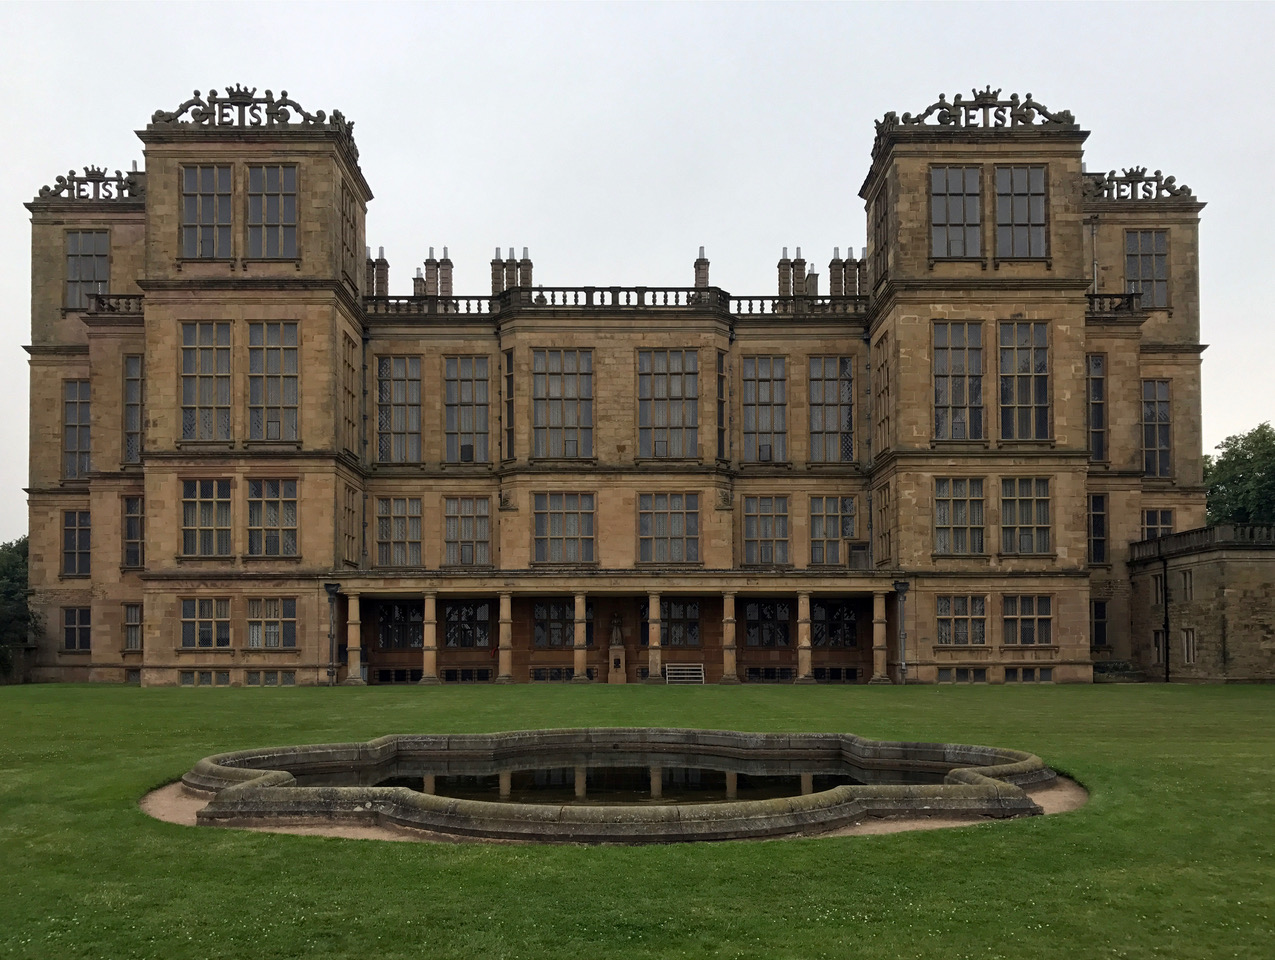 Hardwick Hall, one of the best known country houses in the National Trust's property portfolio